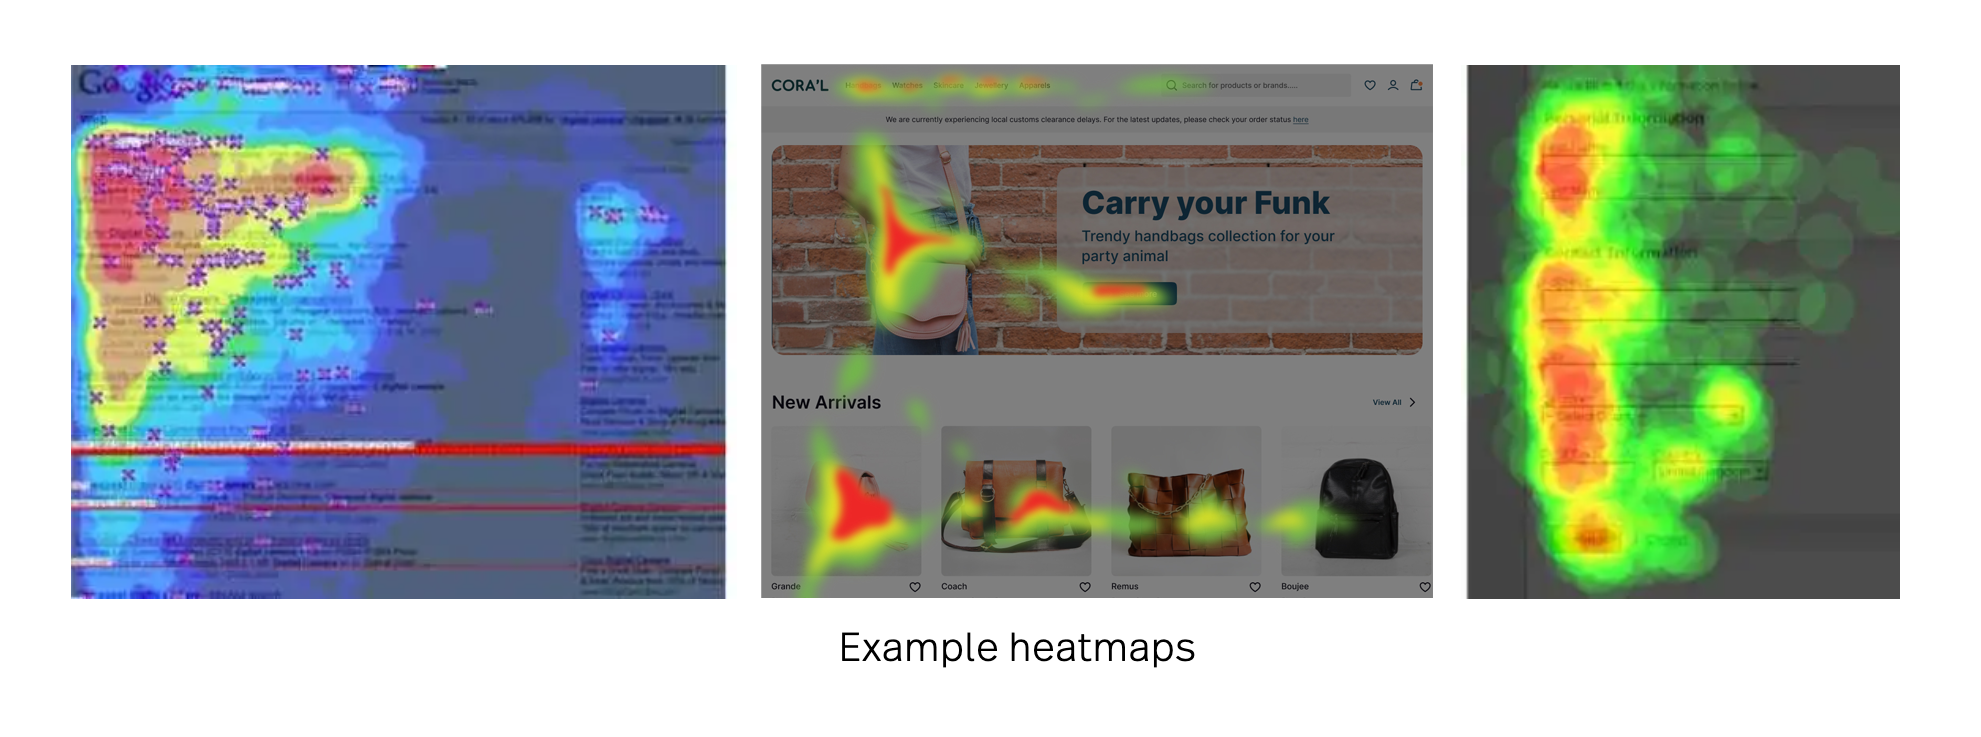 Examples of heatmaps on various pages like search pages and Facebook.